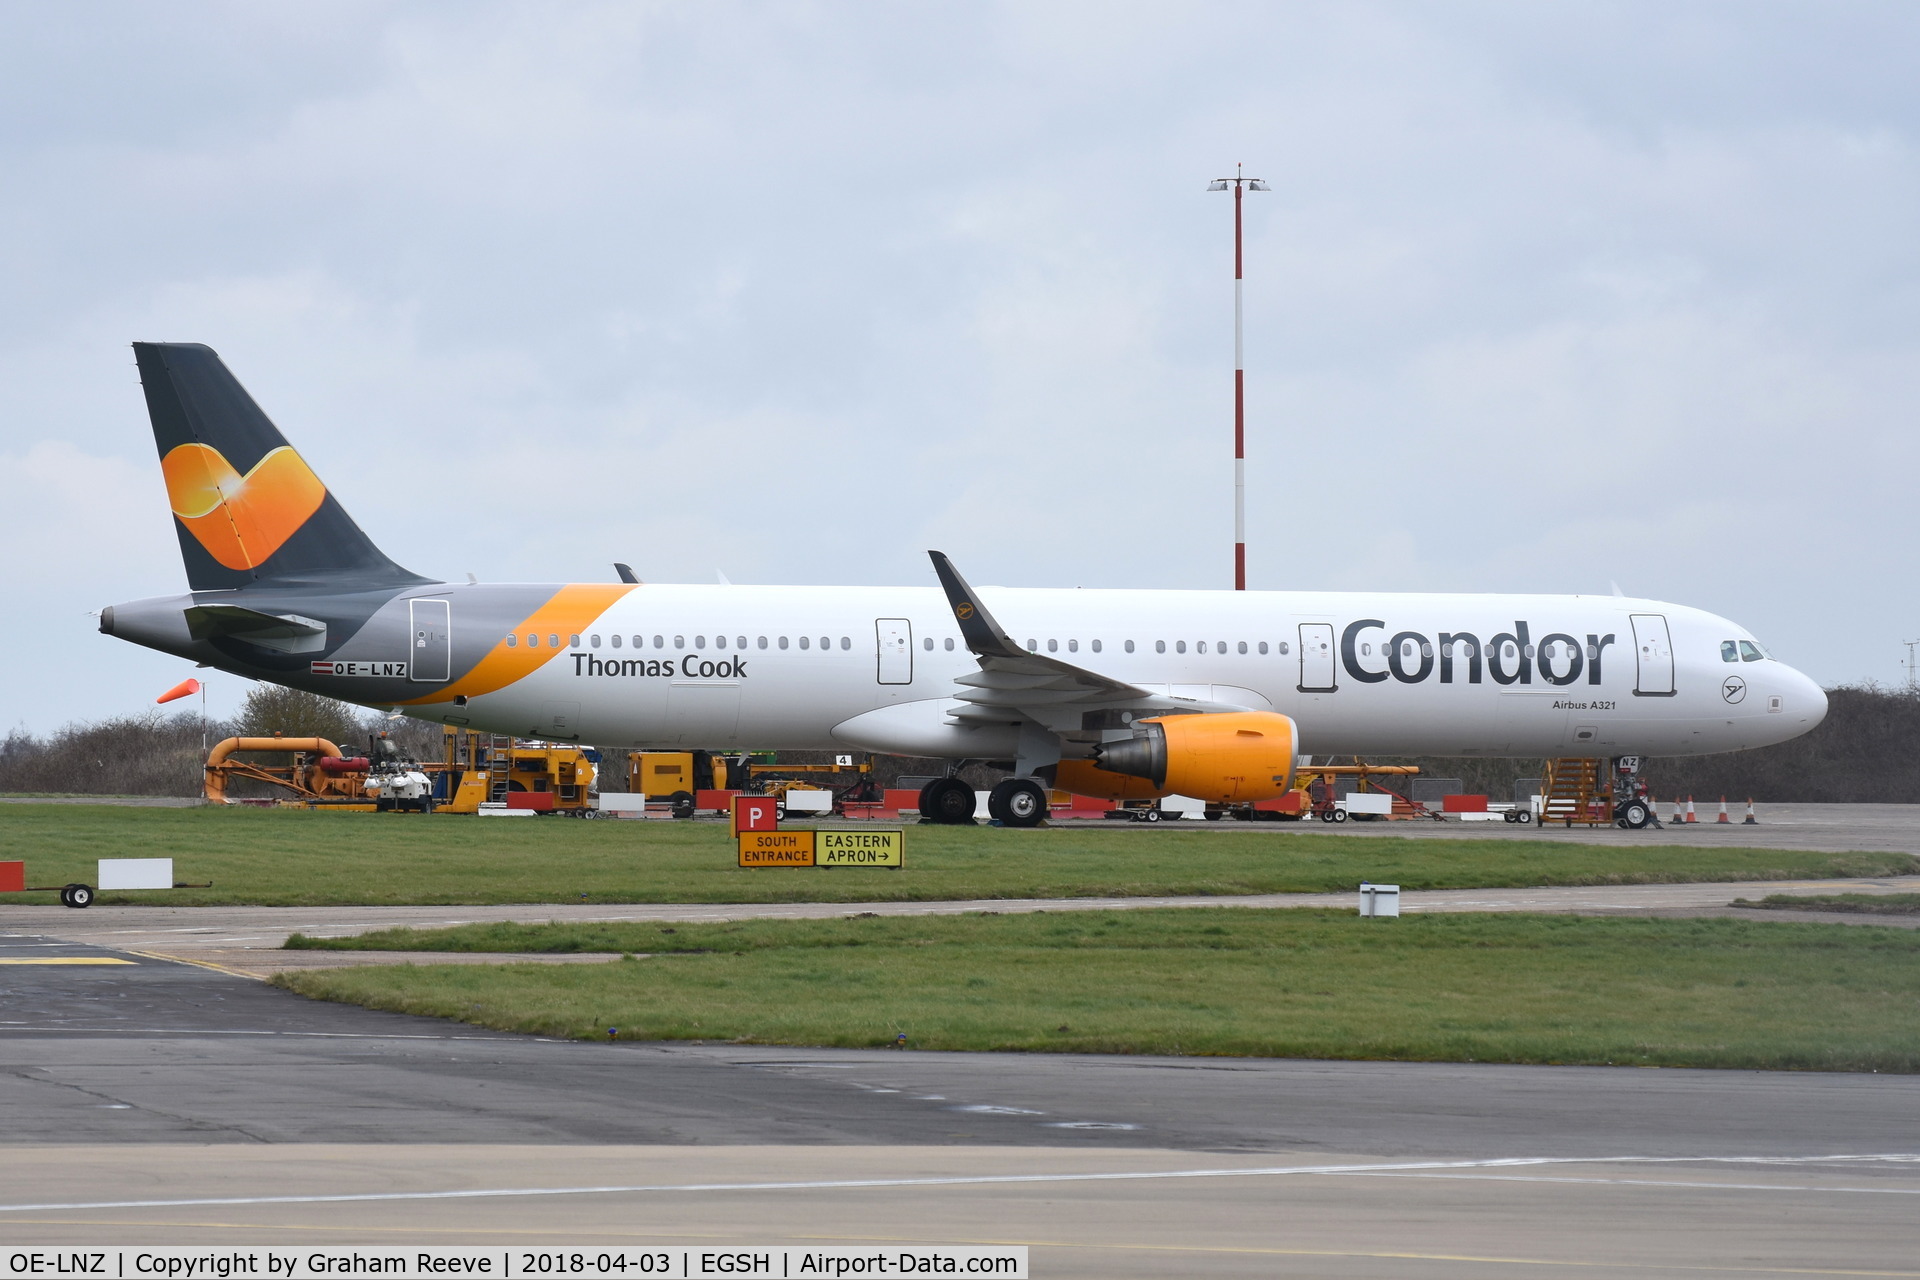 OE-LNZ, 2016 Airbus A321-211 C/N 6979, Parked at Norwich.